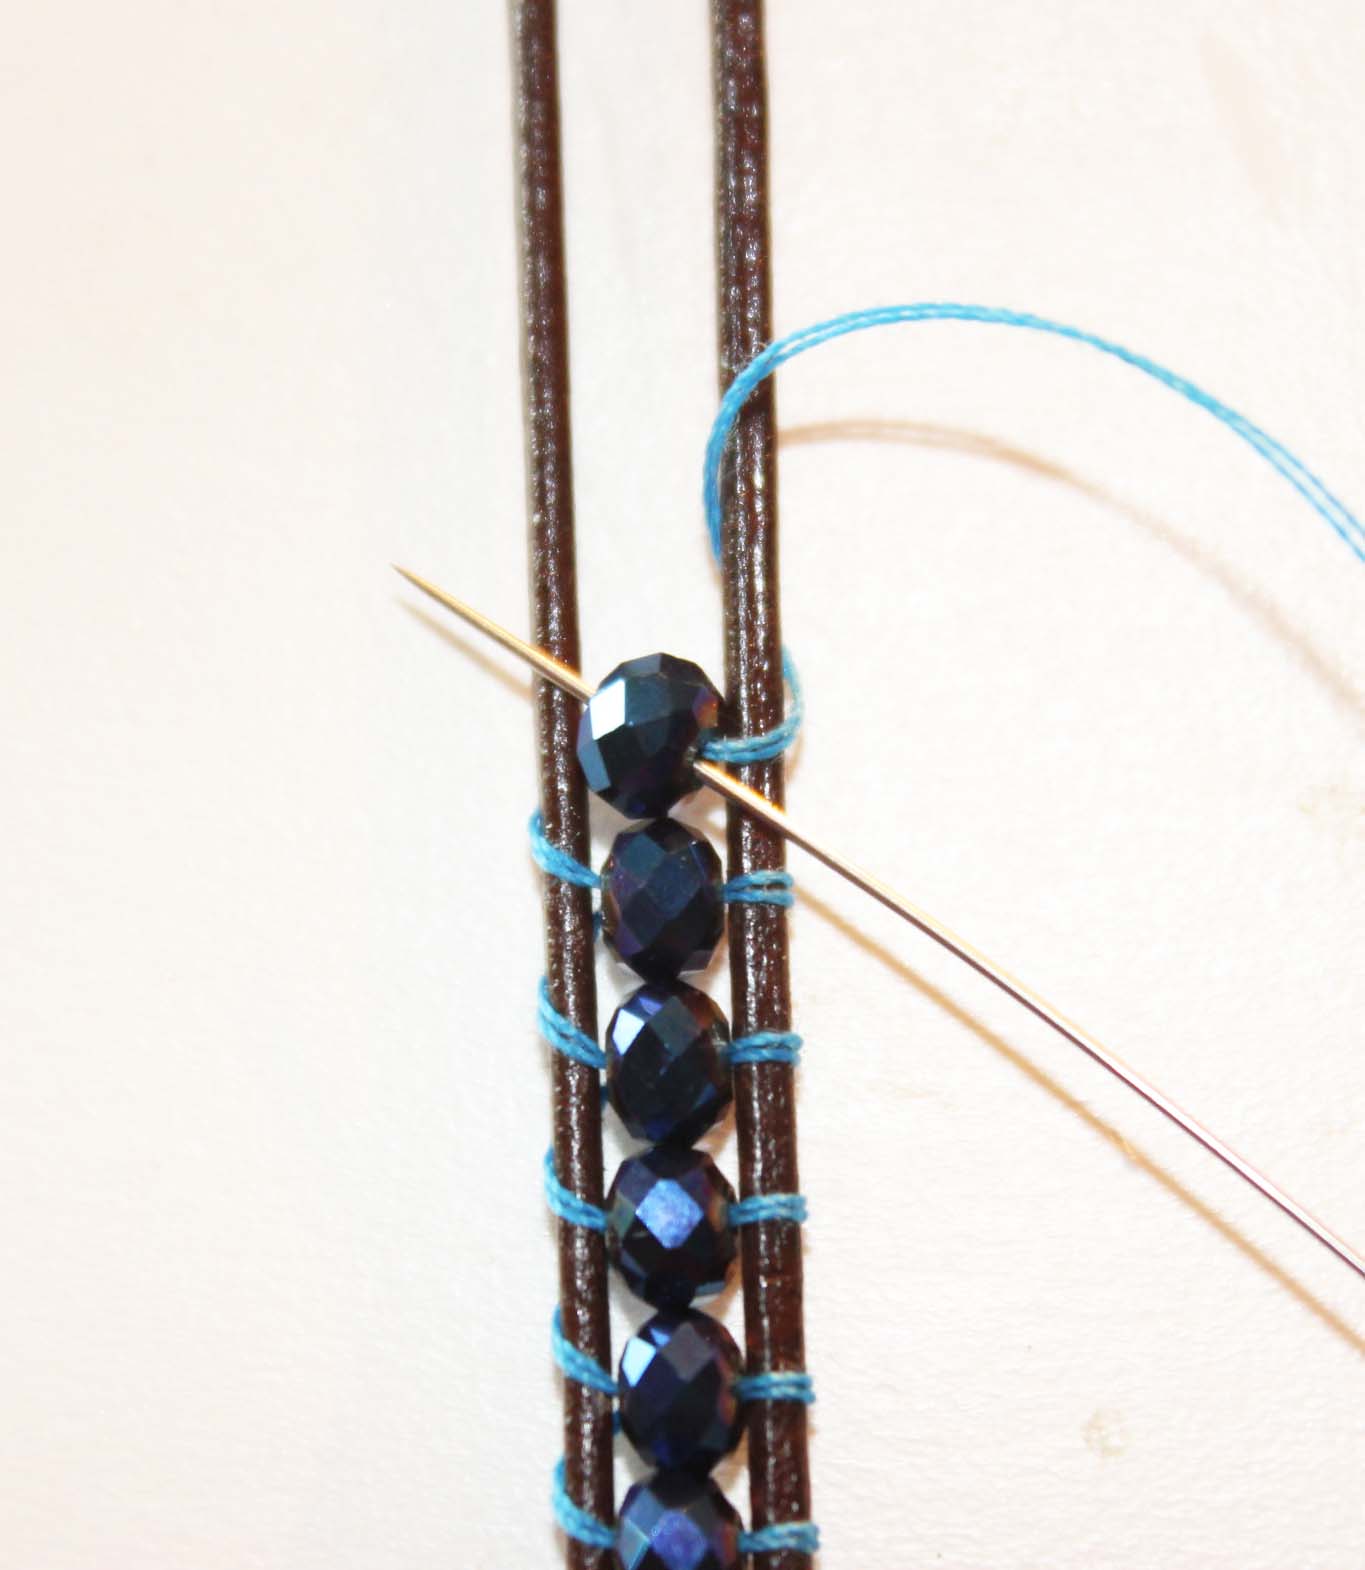 Back through the center of the bead and out over the top of the cord on opposite side